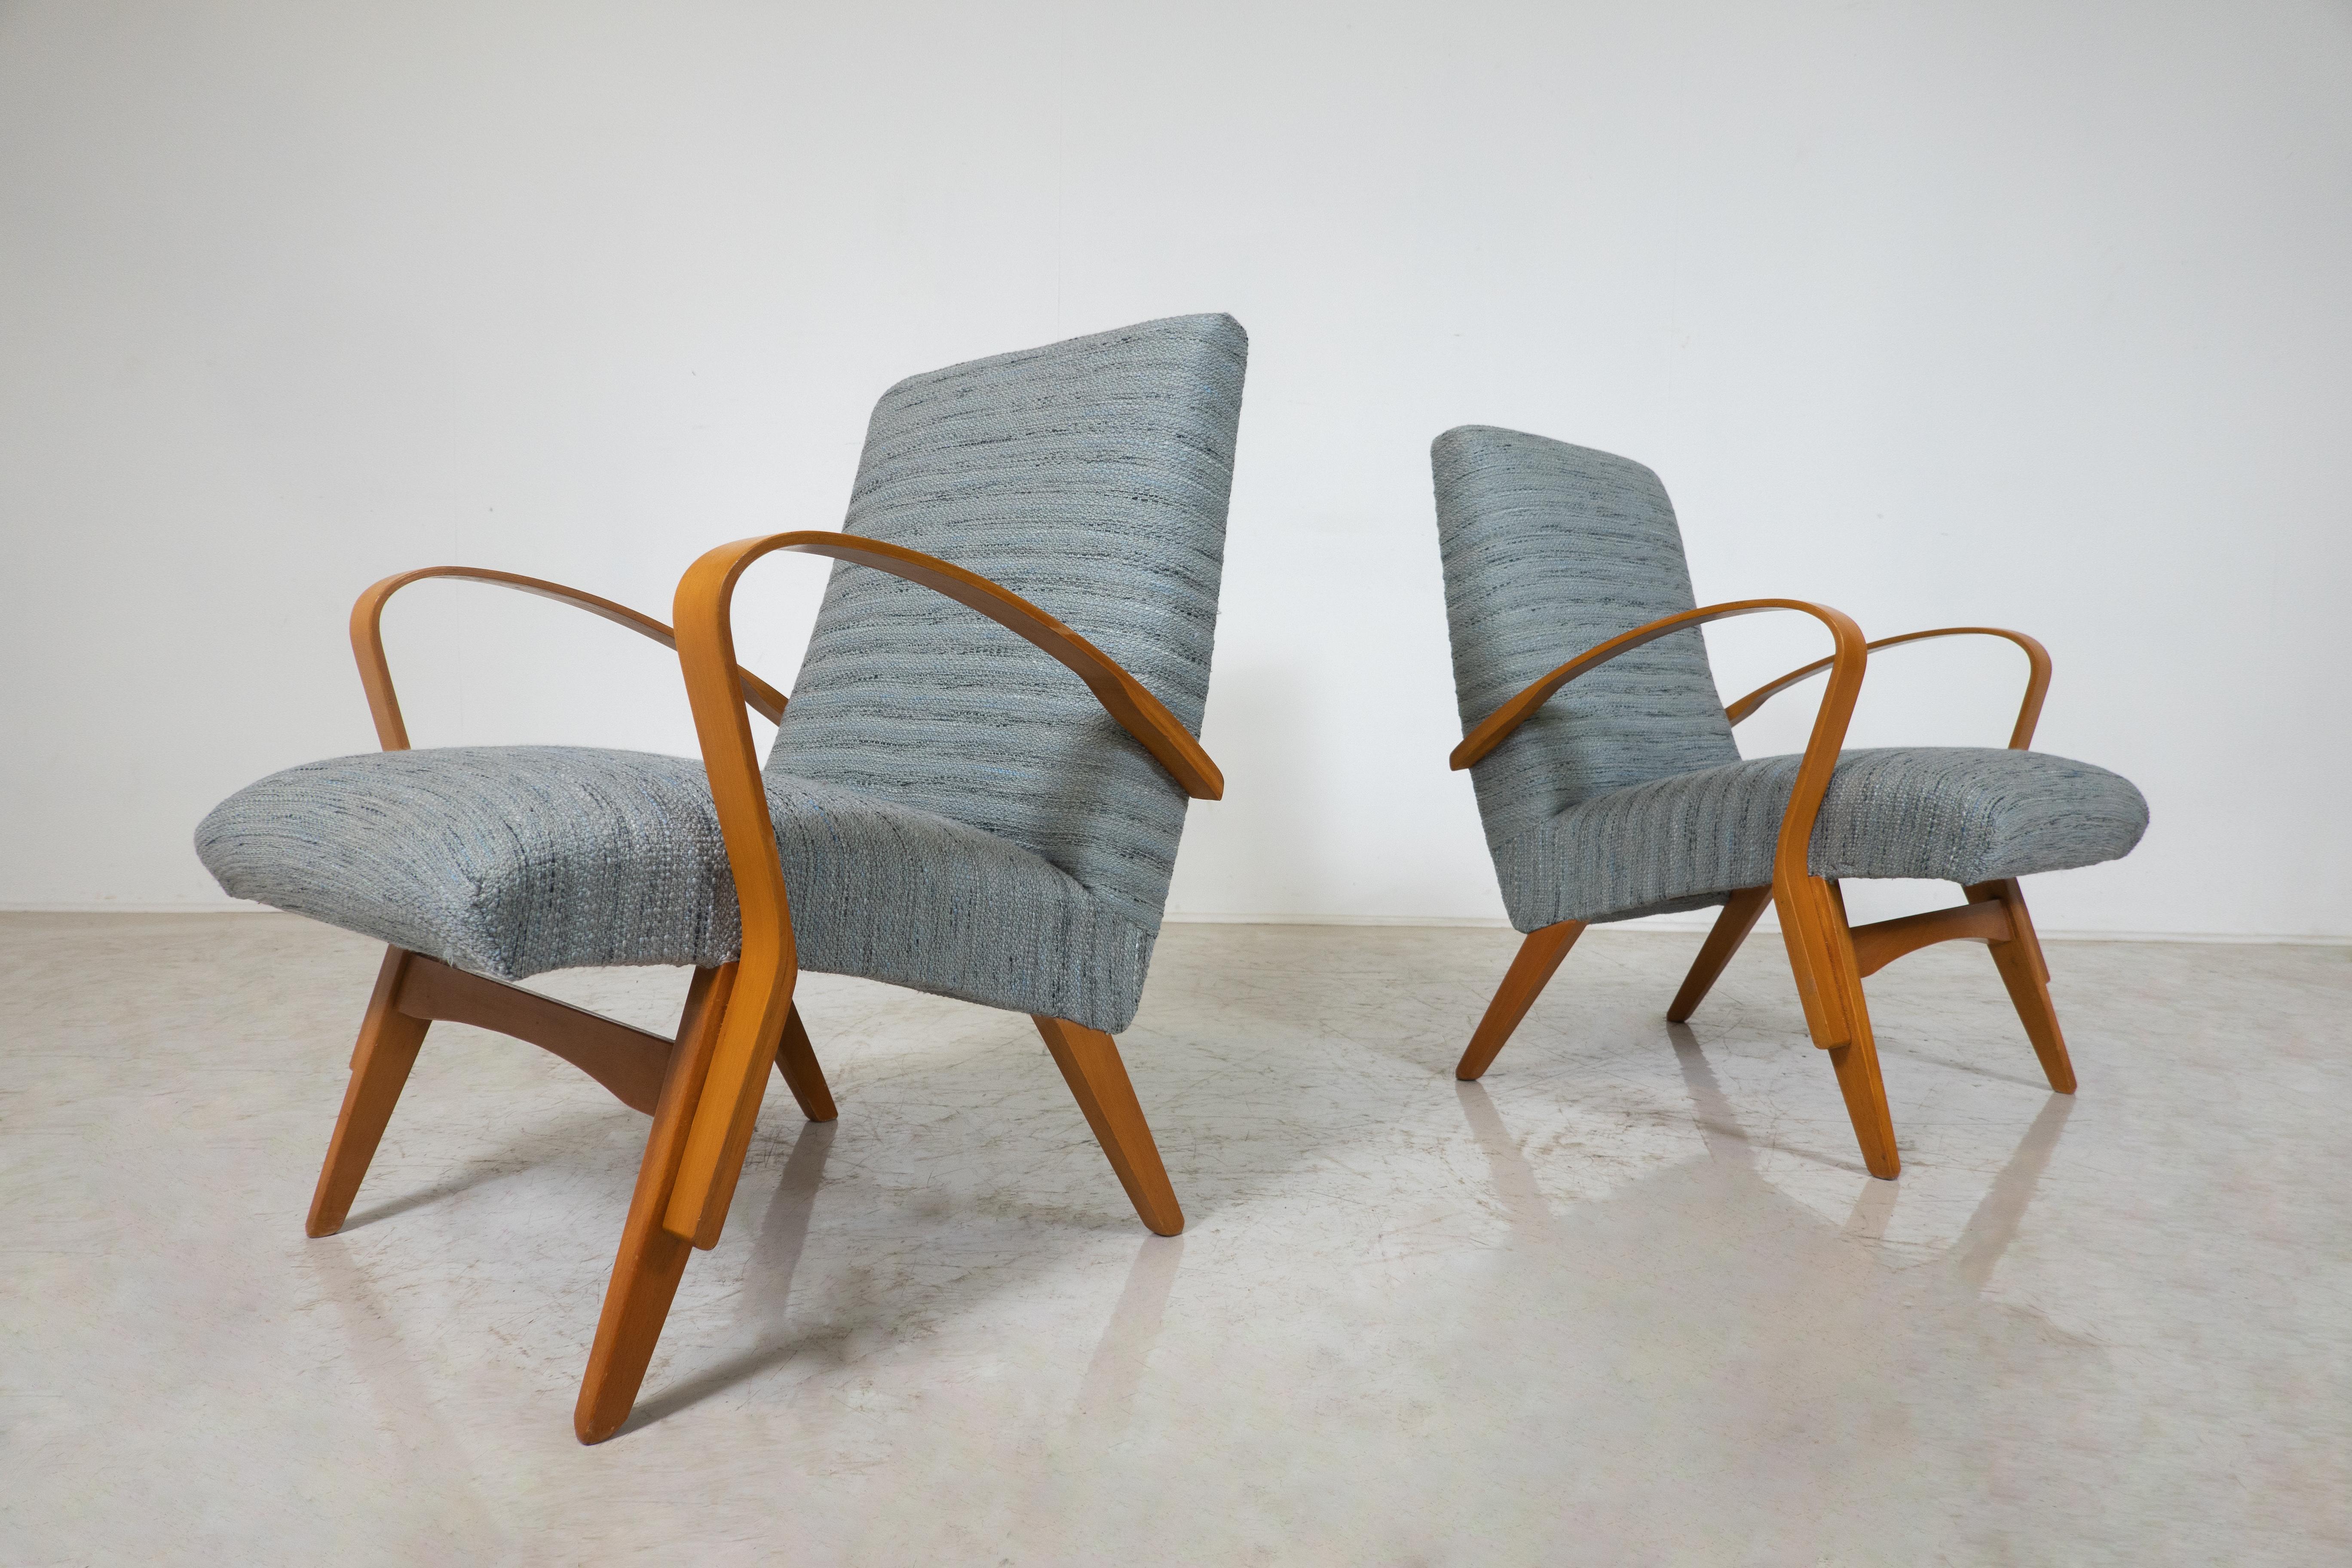 Mid-Century Modern Pair of Armchairs, 1950s, Czech Republic (New Uphostery) For Sale 1